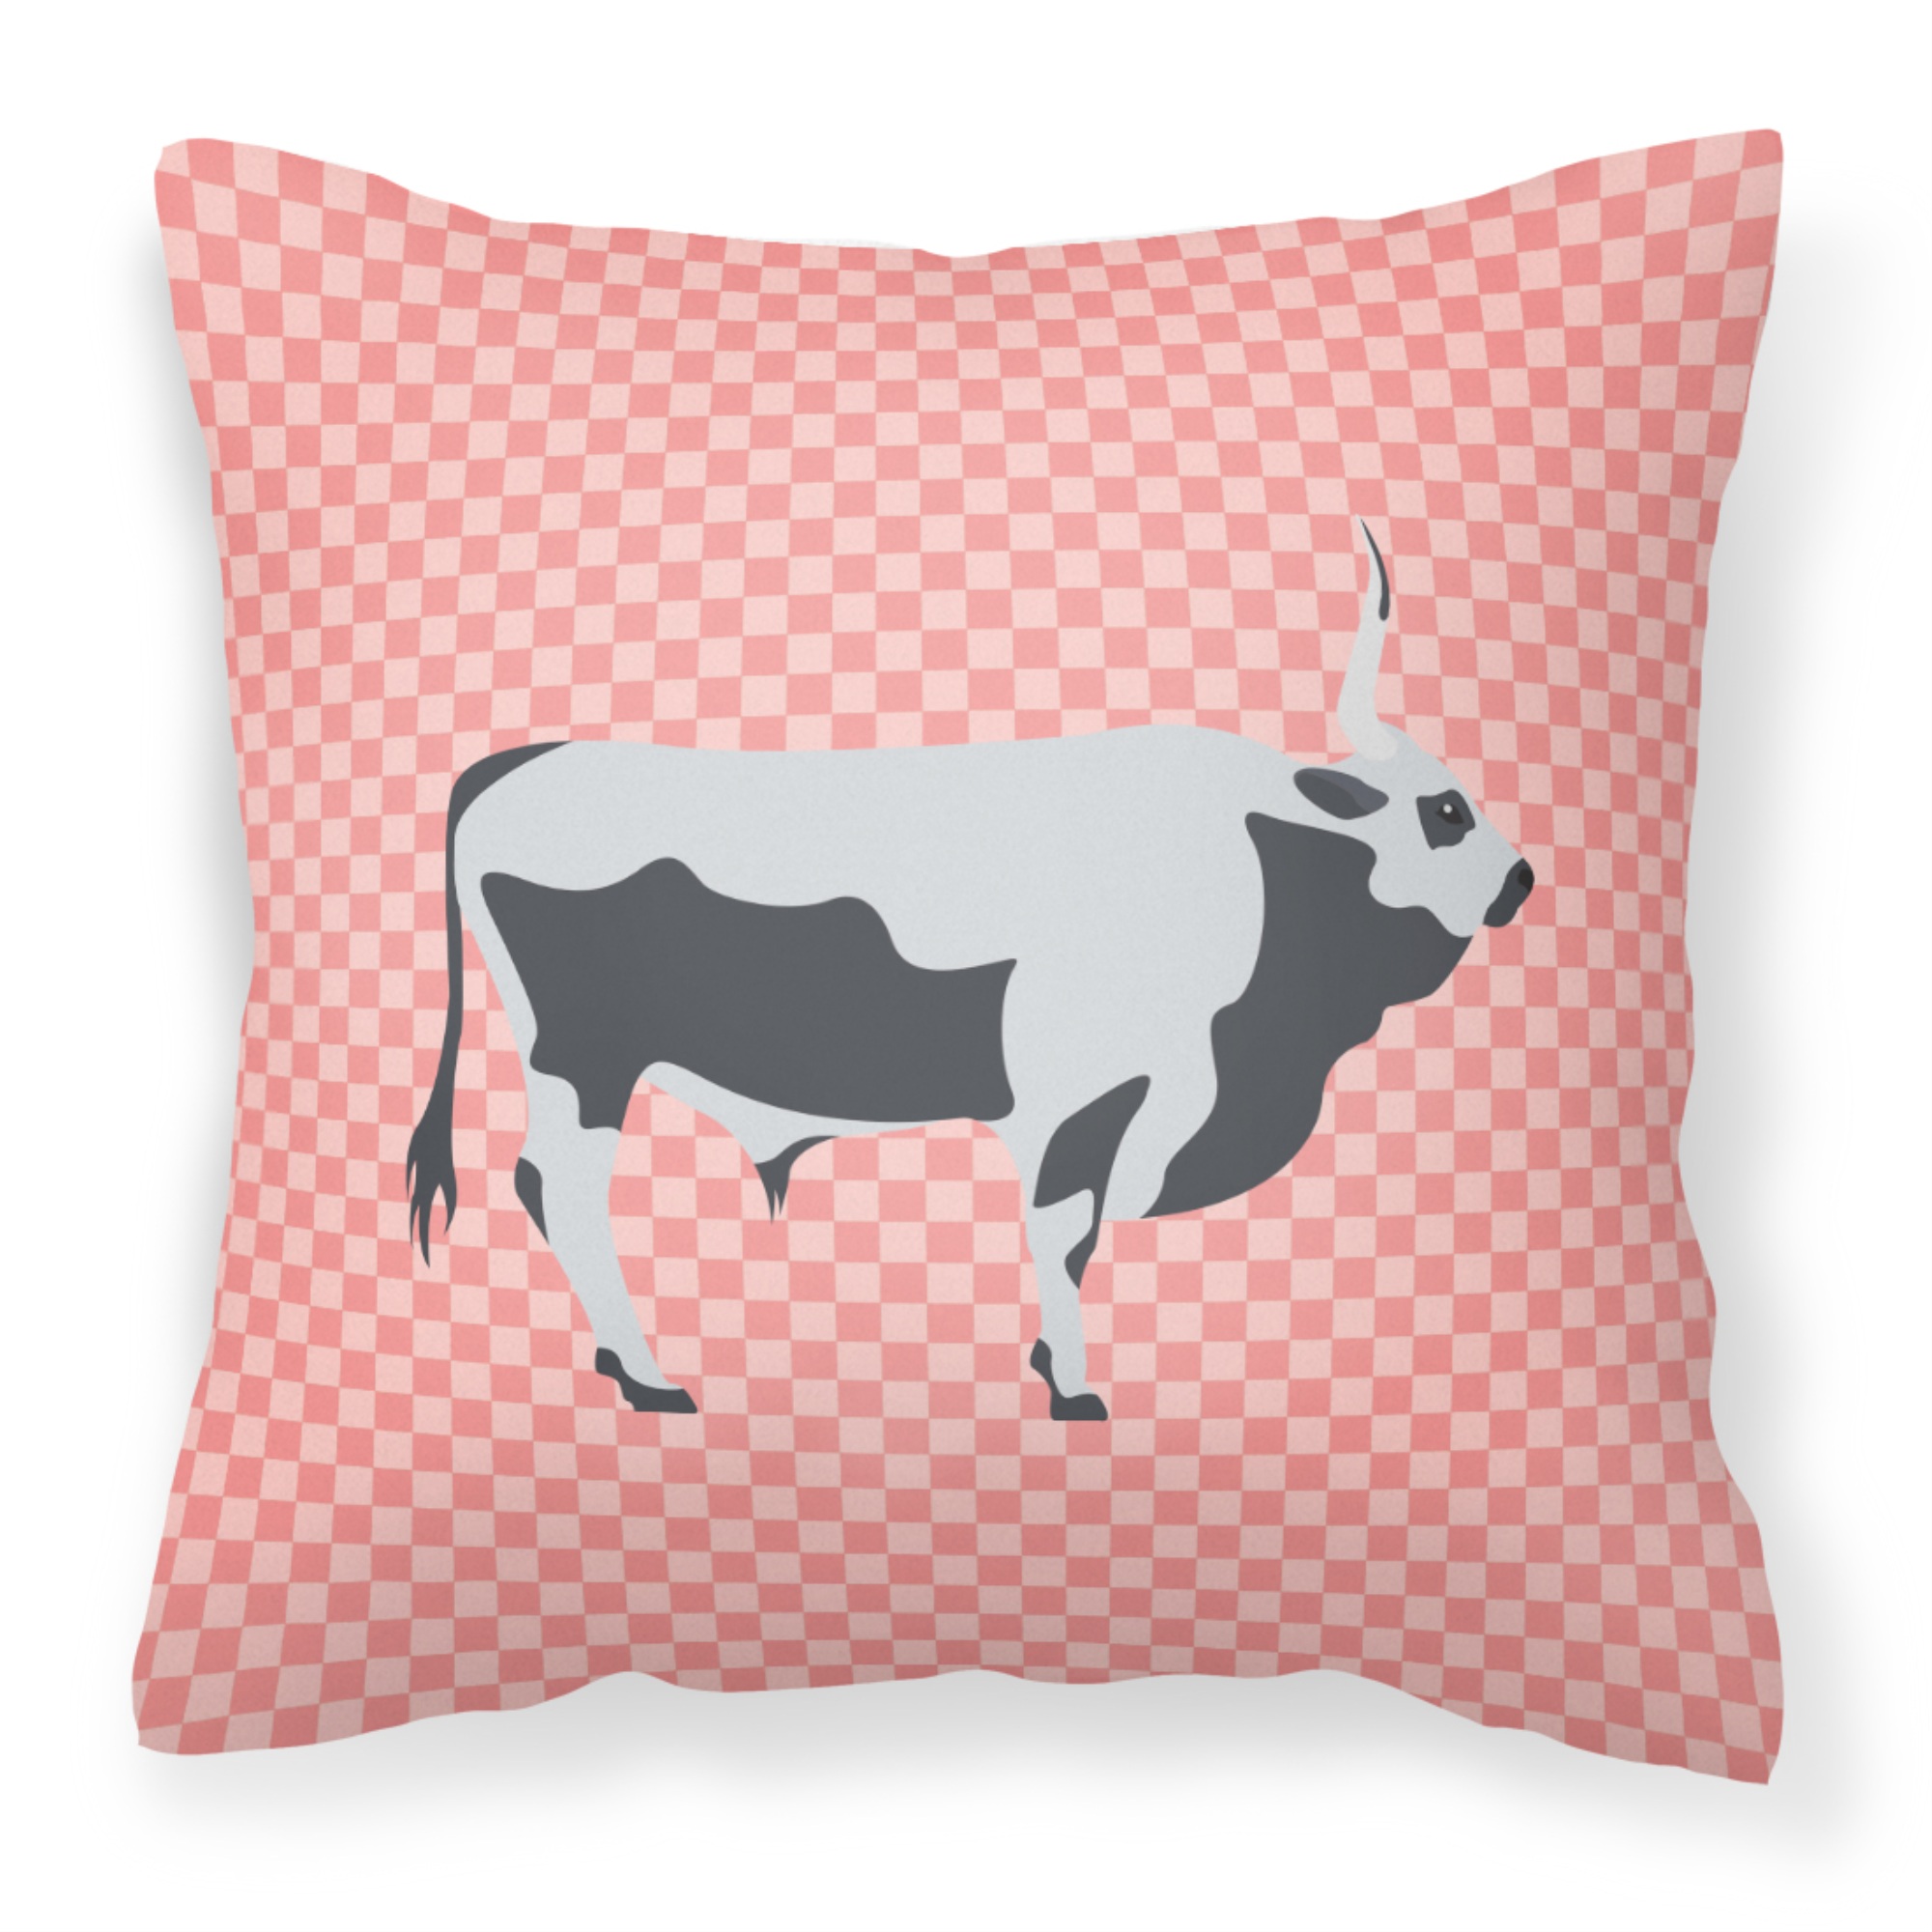 Caroline's Treasures "Caroline's Treasures BB7824PW1818 Hungarian Grey Steppe Cow Pink Check Outdoor Canvas Fabric Decorative Pillow, Multicolor"